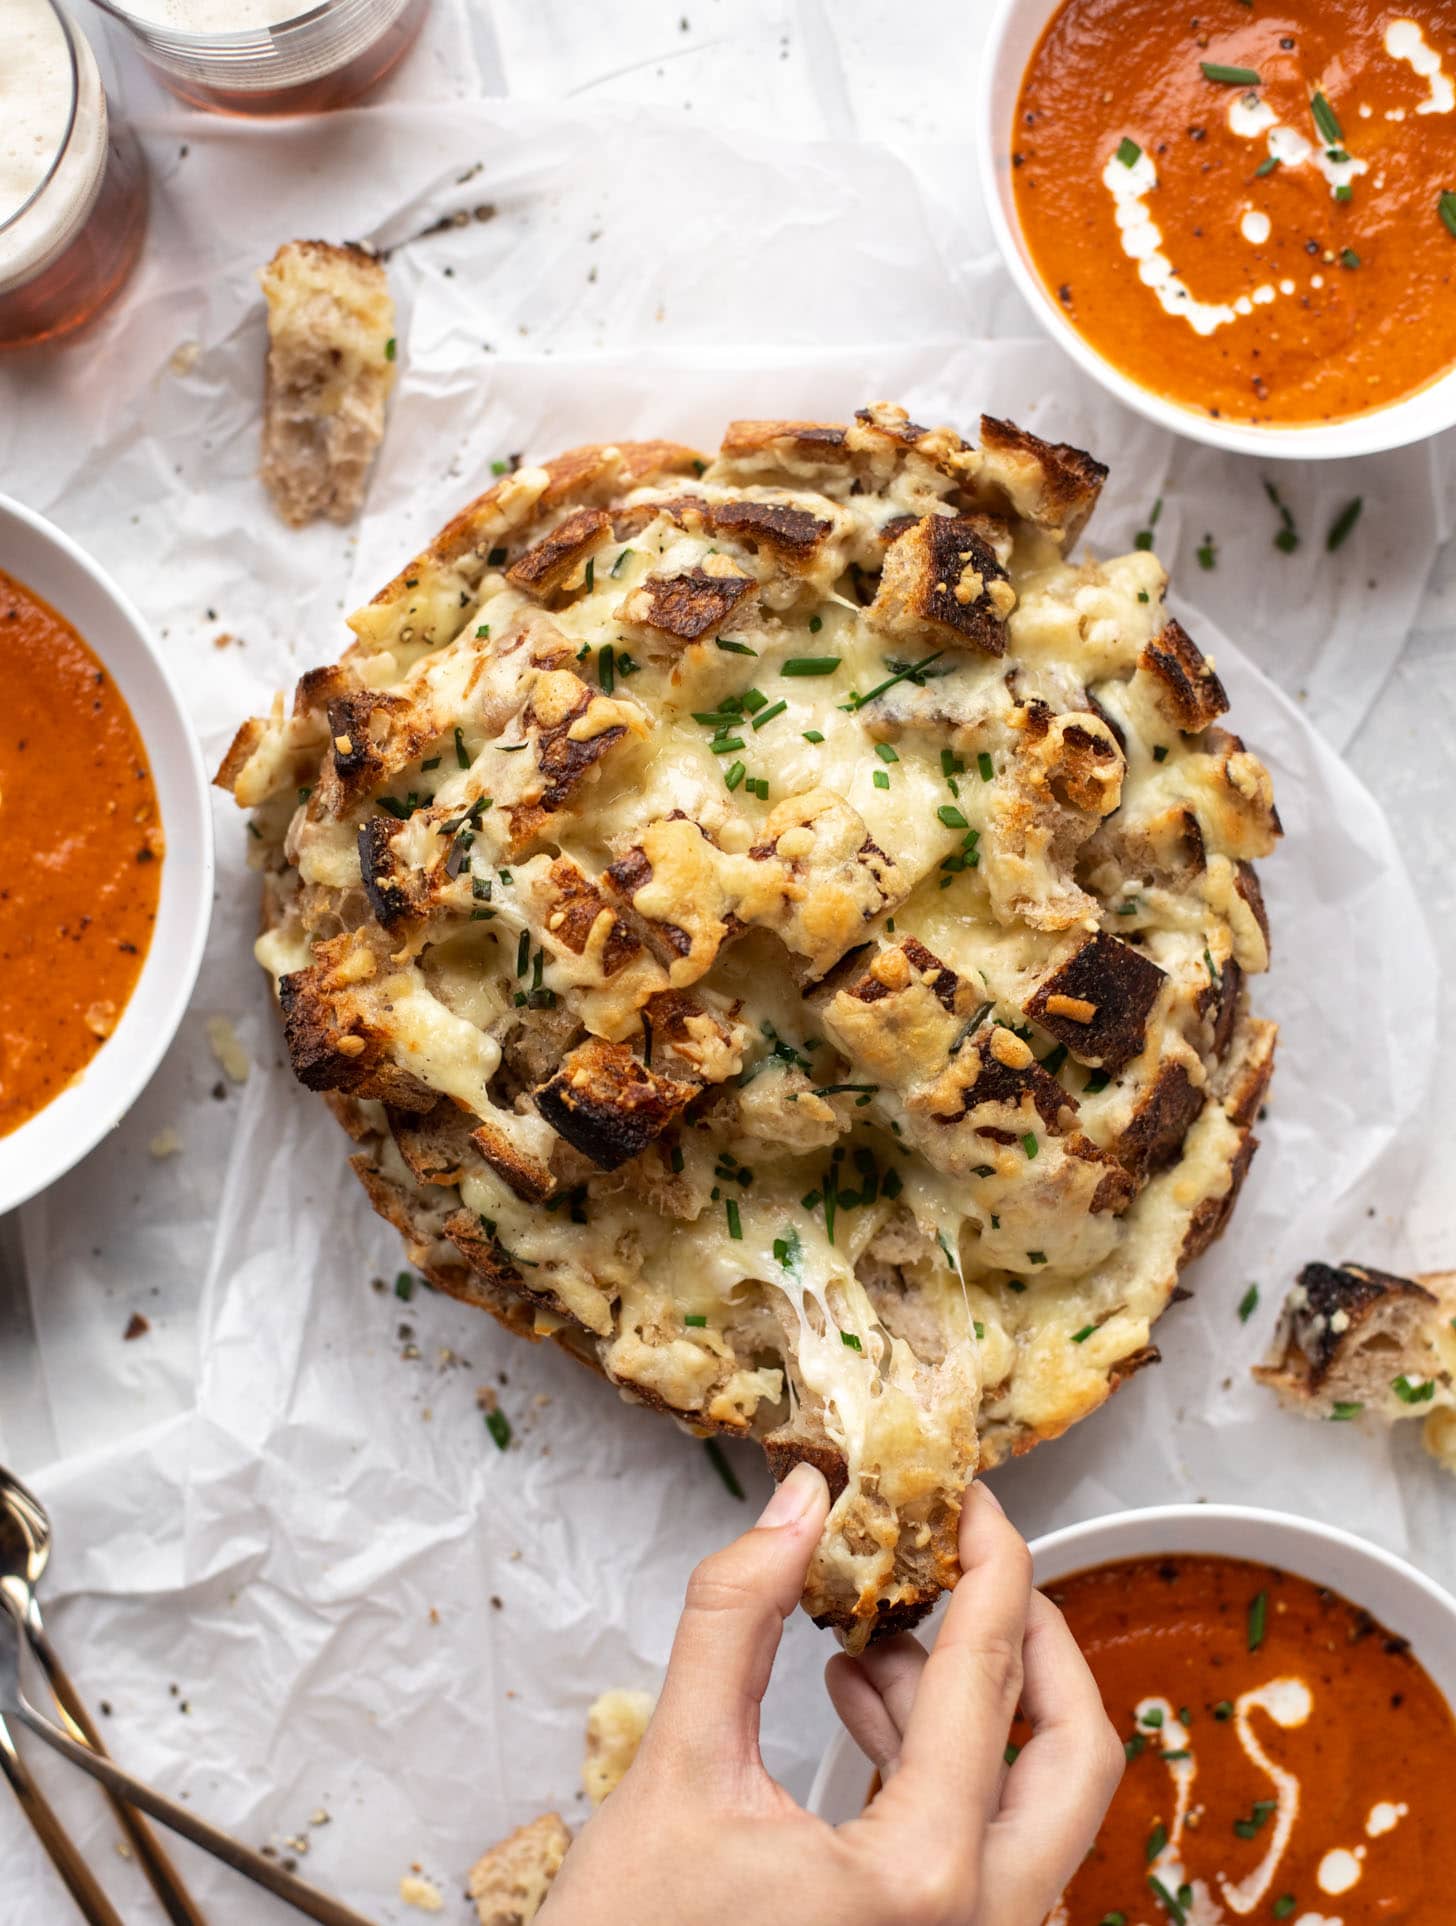 chipotle tomato soup with smoked cheddar pull apart bread